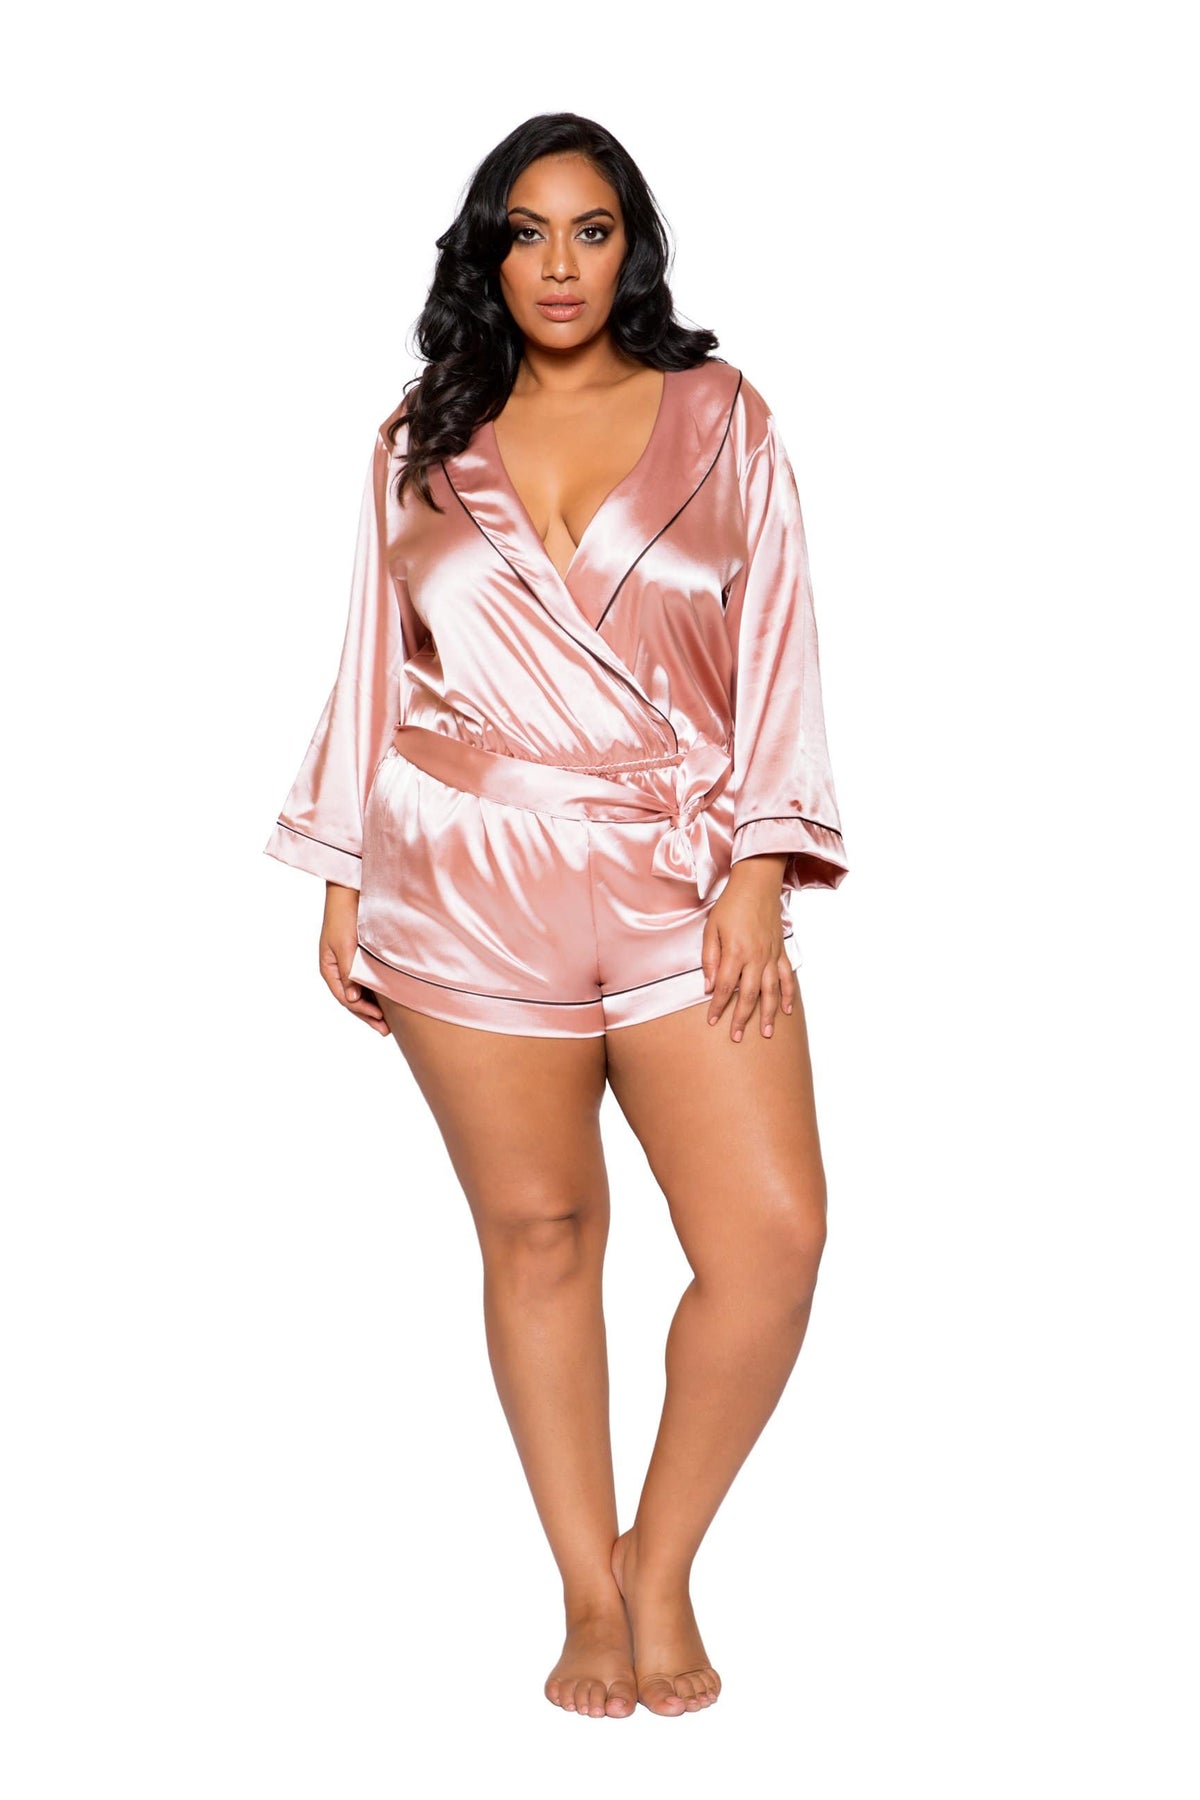 Roma PINK / XL Chic Cozy Collared Satin Plus Size Romper SHC-LI285-PINK-XL-R Chic Cozy Collared Satin Plus Size Romper Roma Costume LI285 Apparel &amp; Accessories &gt; Clothing &gt; Underwear &amp; Socks &gt; Lingerie